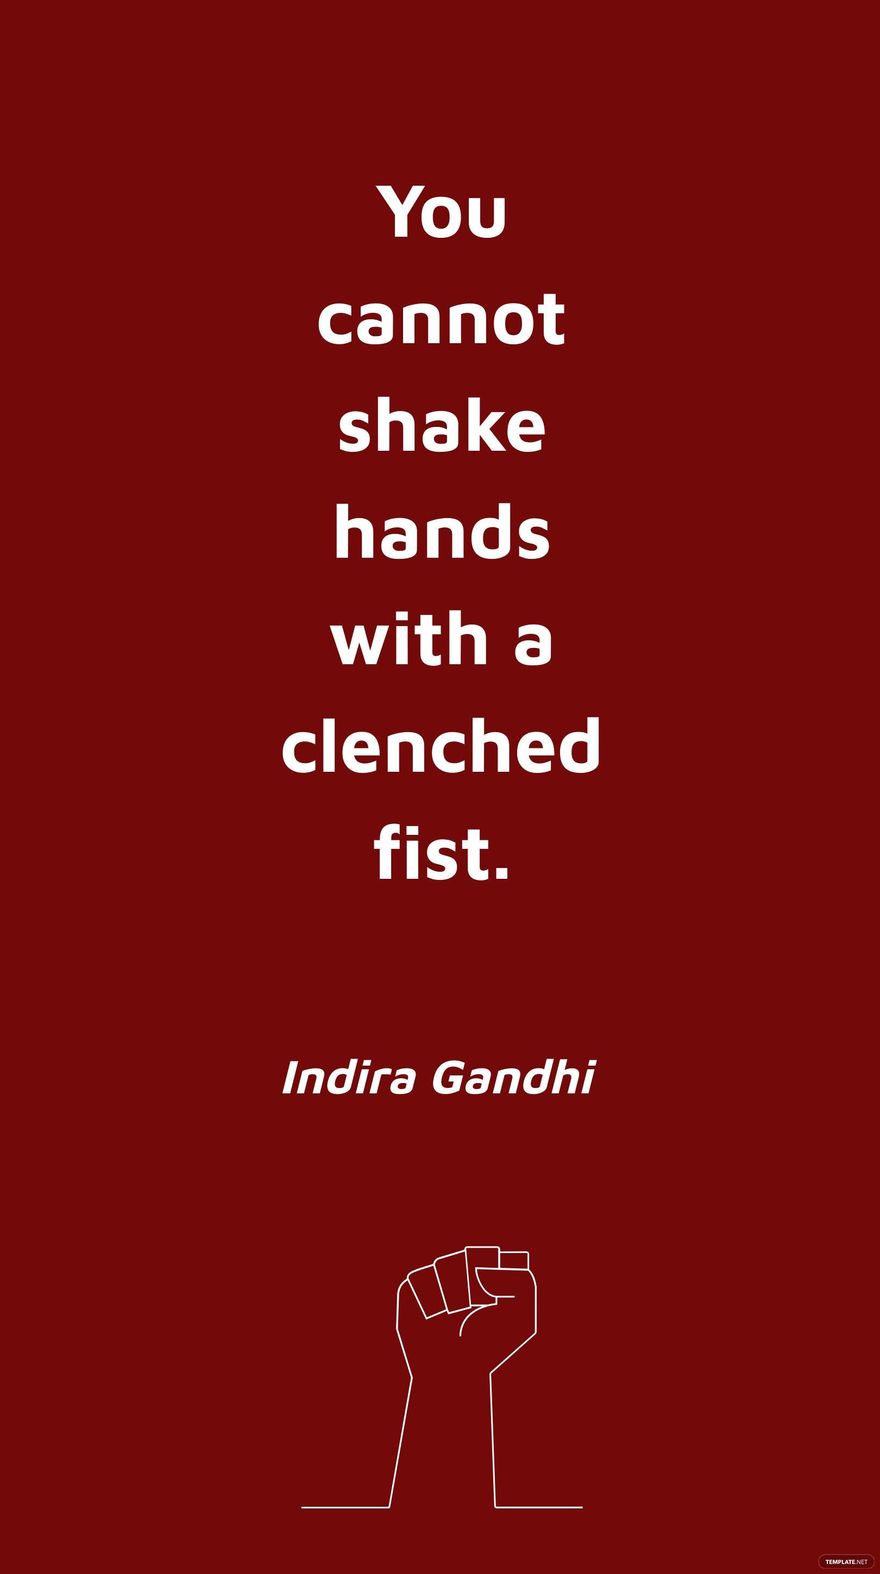 Indira Gandhi - You cannot shake hands with a clenched fist.